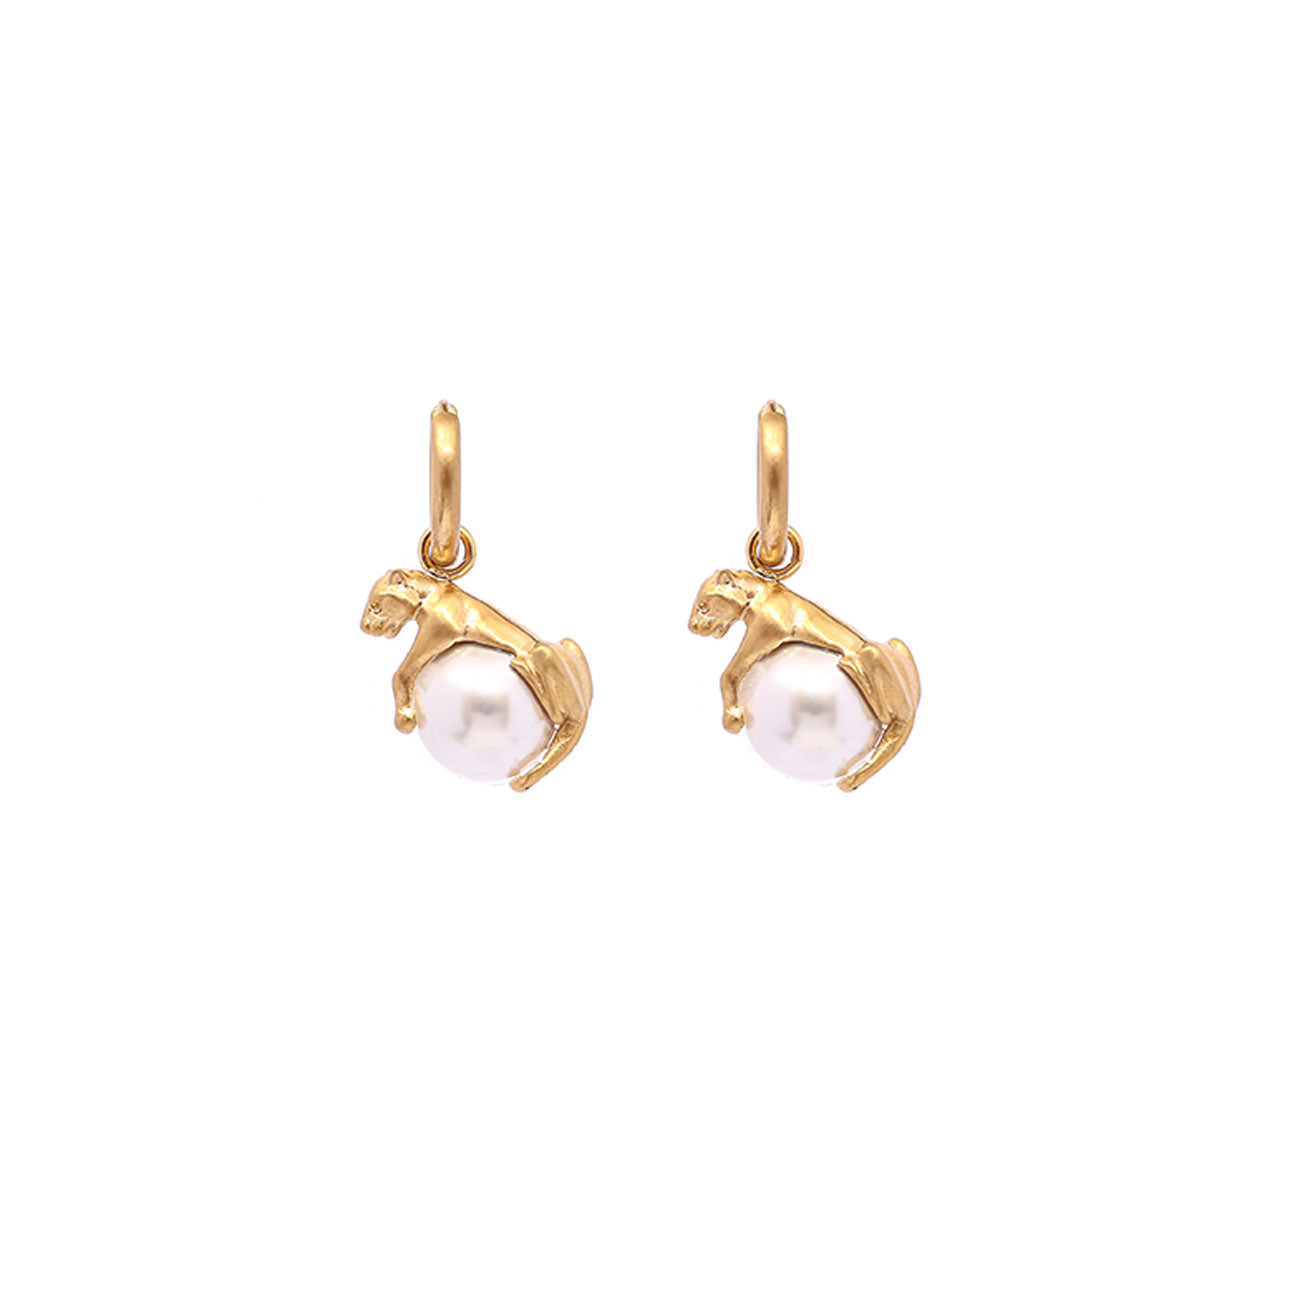 Panther pearl earrings